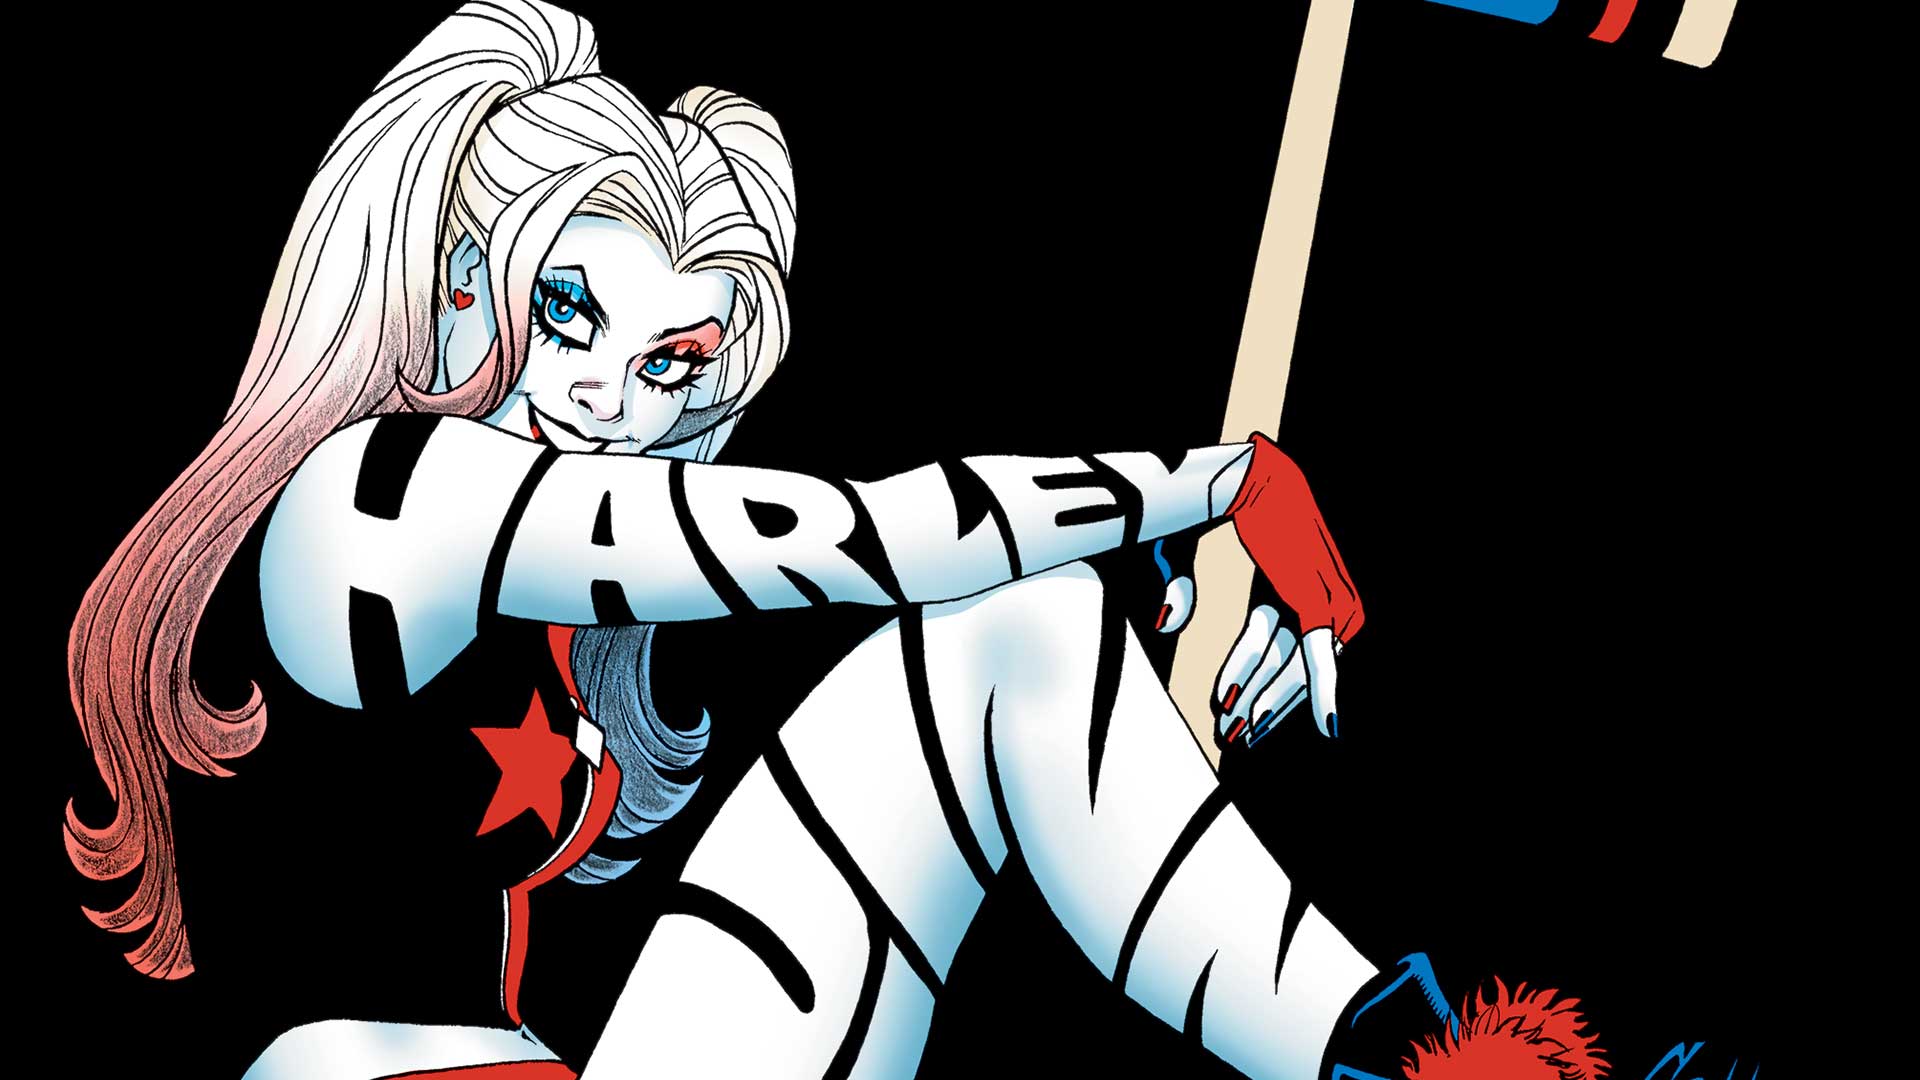 Harley Quinn Wallpaper, image collections of wallpaper